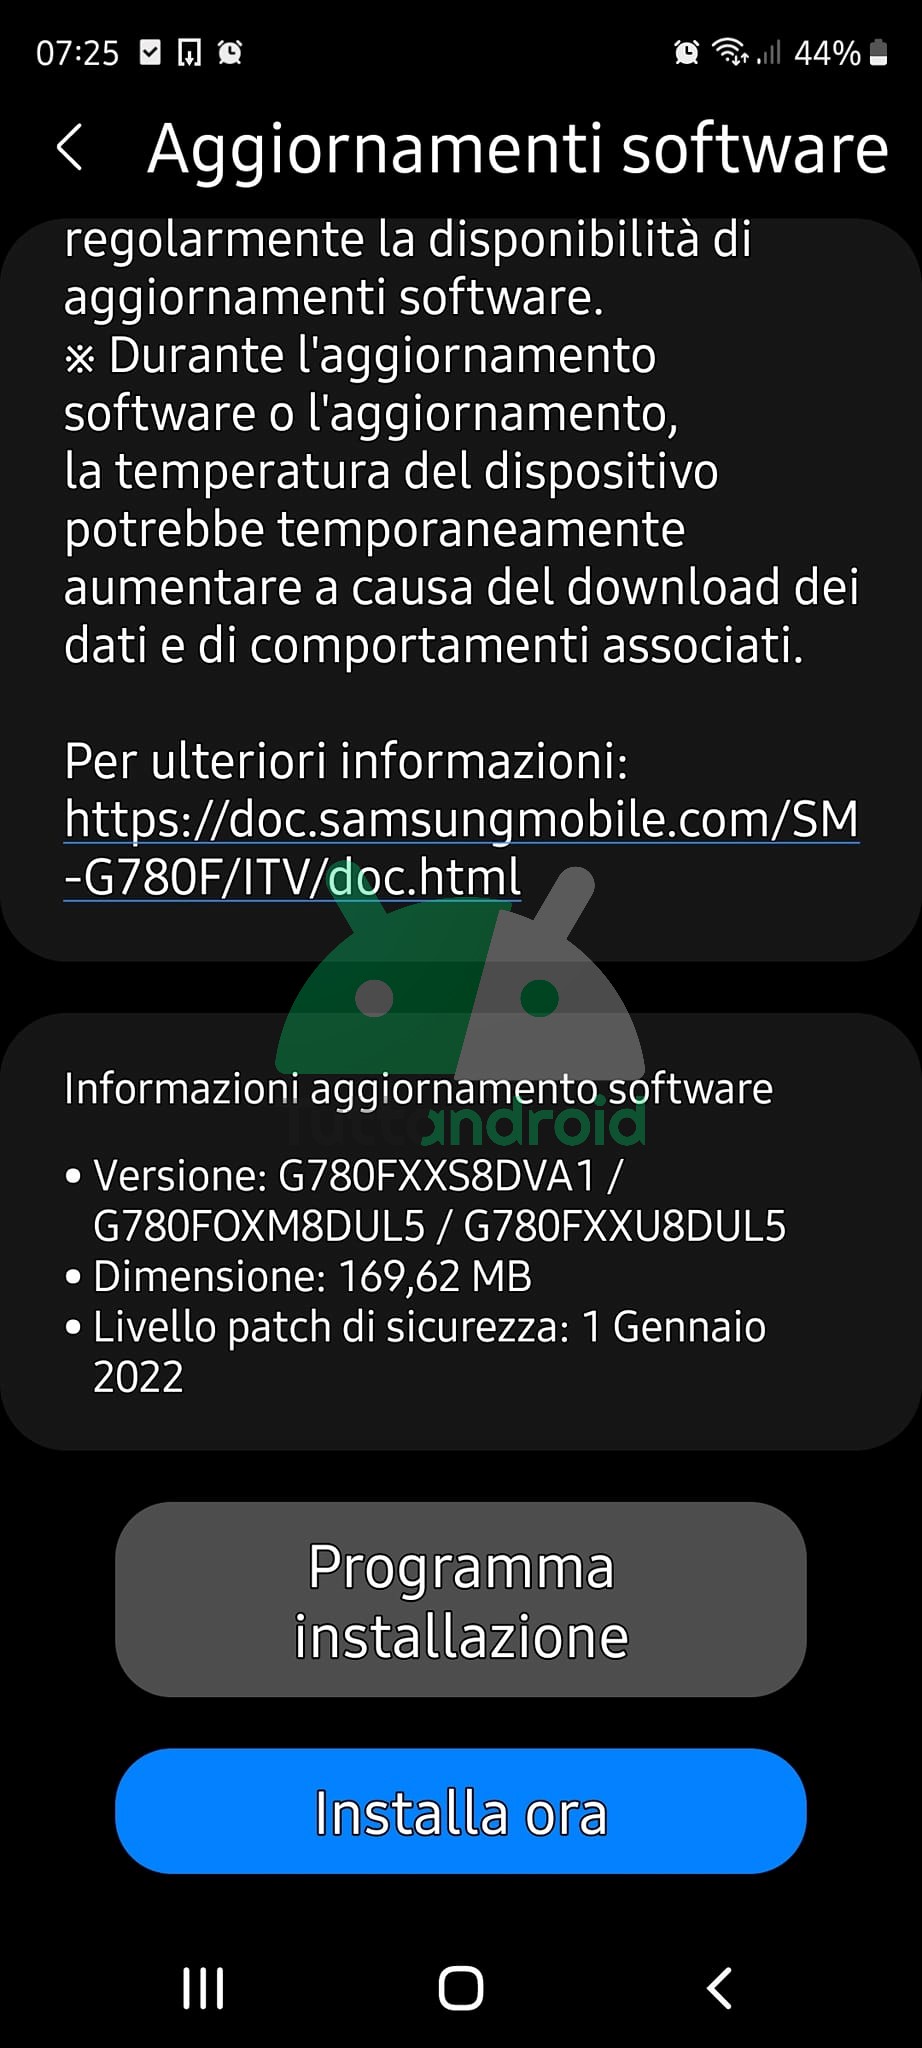 Samsung Galaxy S20 FE update patch February 2022